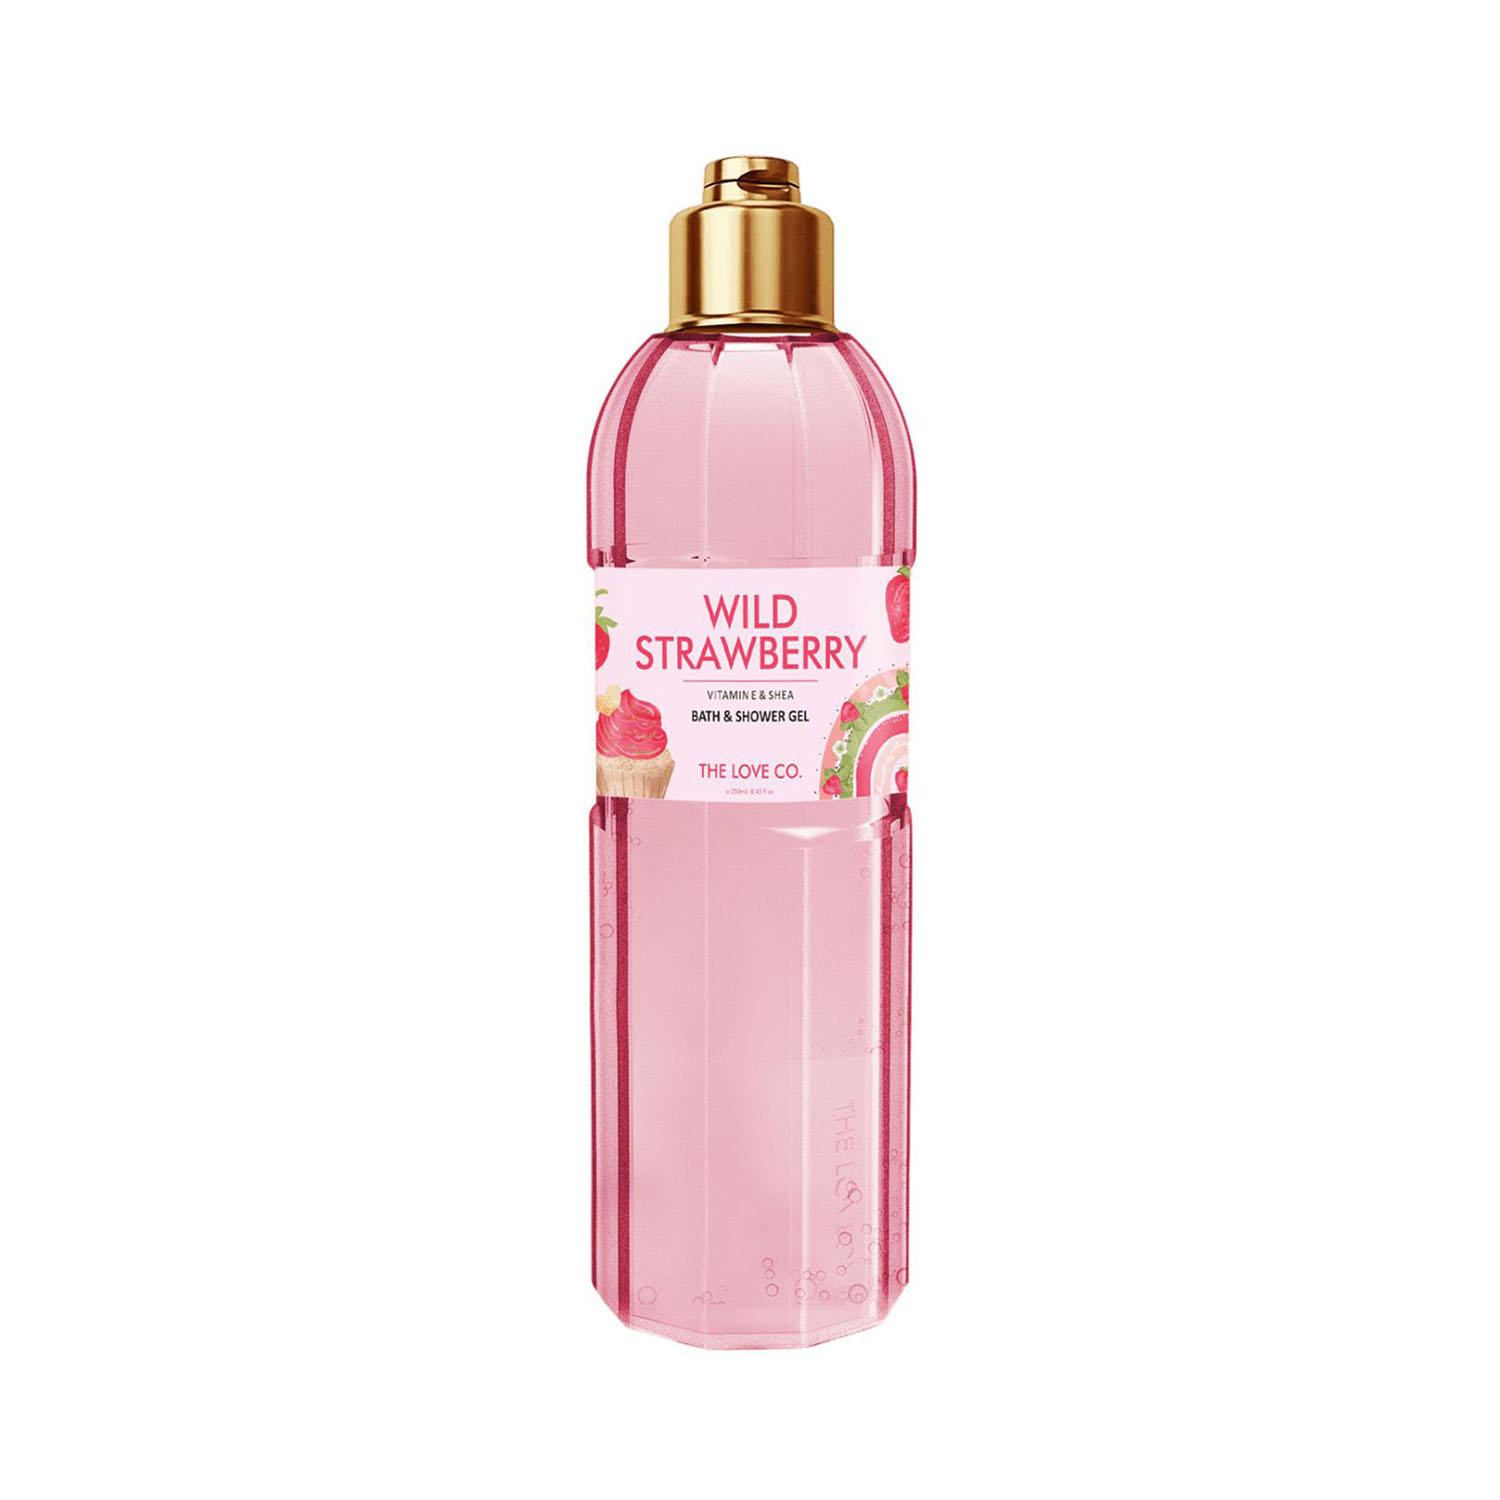 THE LOVE CO. | THE LOVE CO. Wild Strawberry Bath and Shower Gel (250ml)